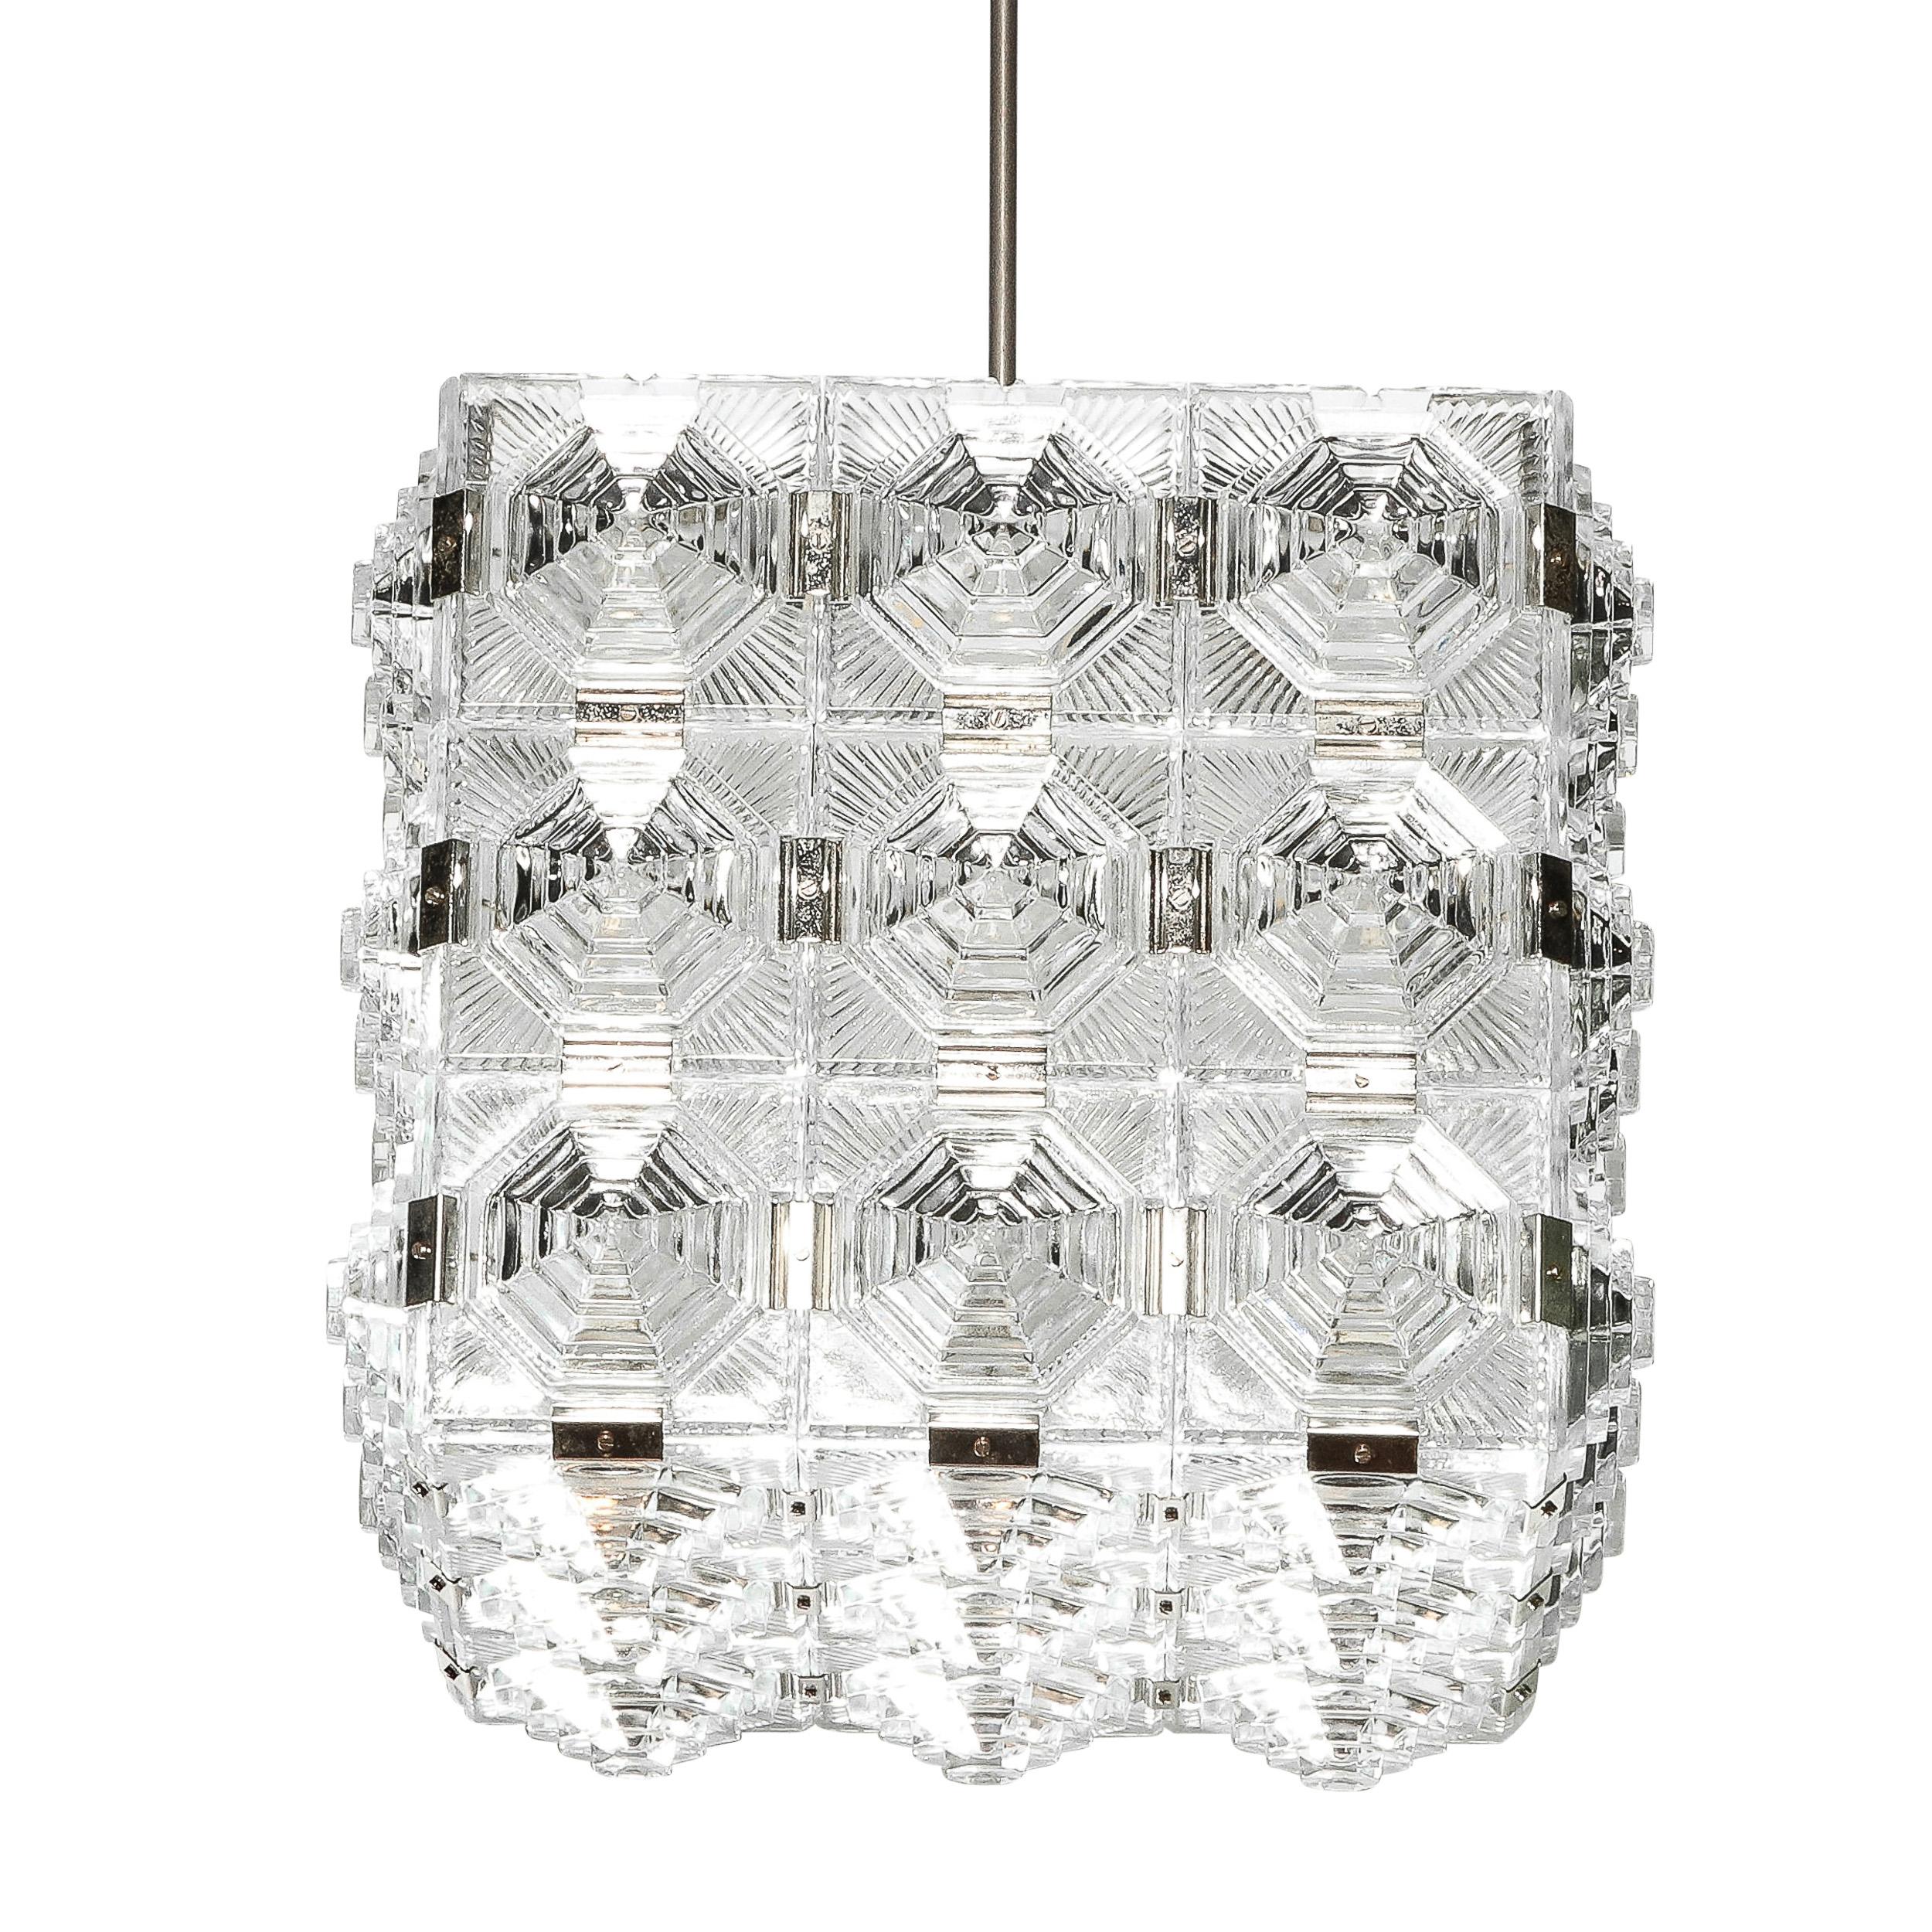 This pair of Mid-Century Modernist Square Pendant Chandeliers were created by the esteemed maker Kinkeldey and originate from Germany, Circa 1970. Composed in repeating skyscraper style tiered pressed glass shades connected edge to edge with chrome